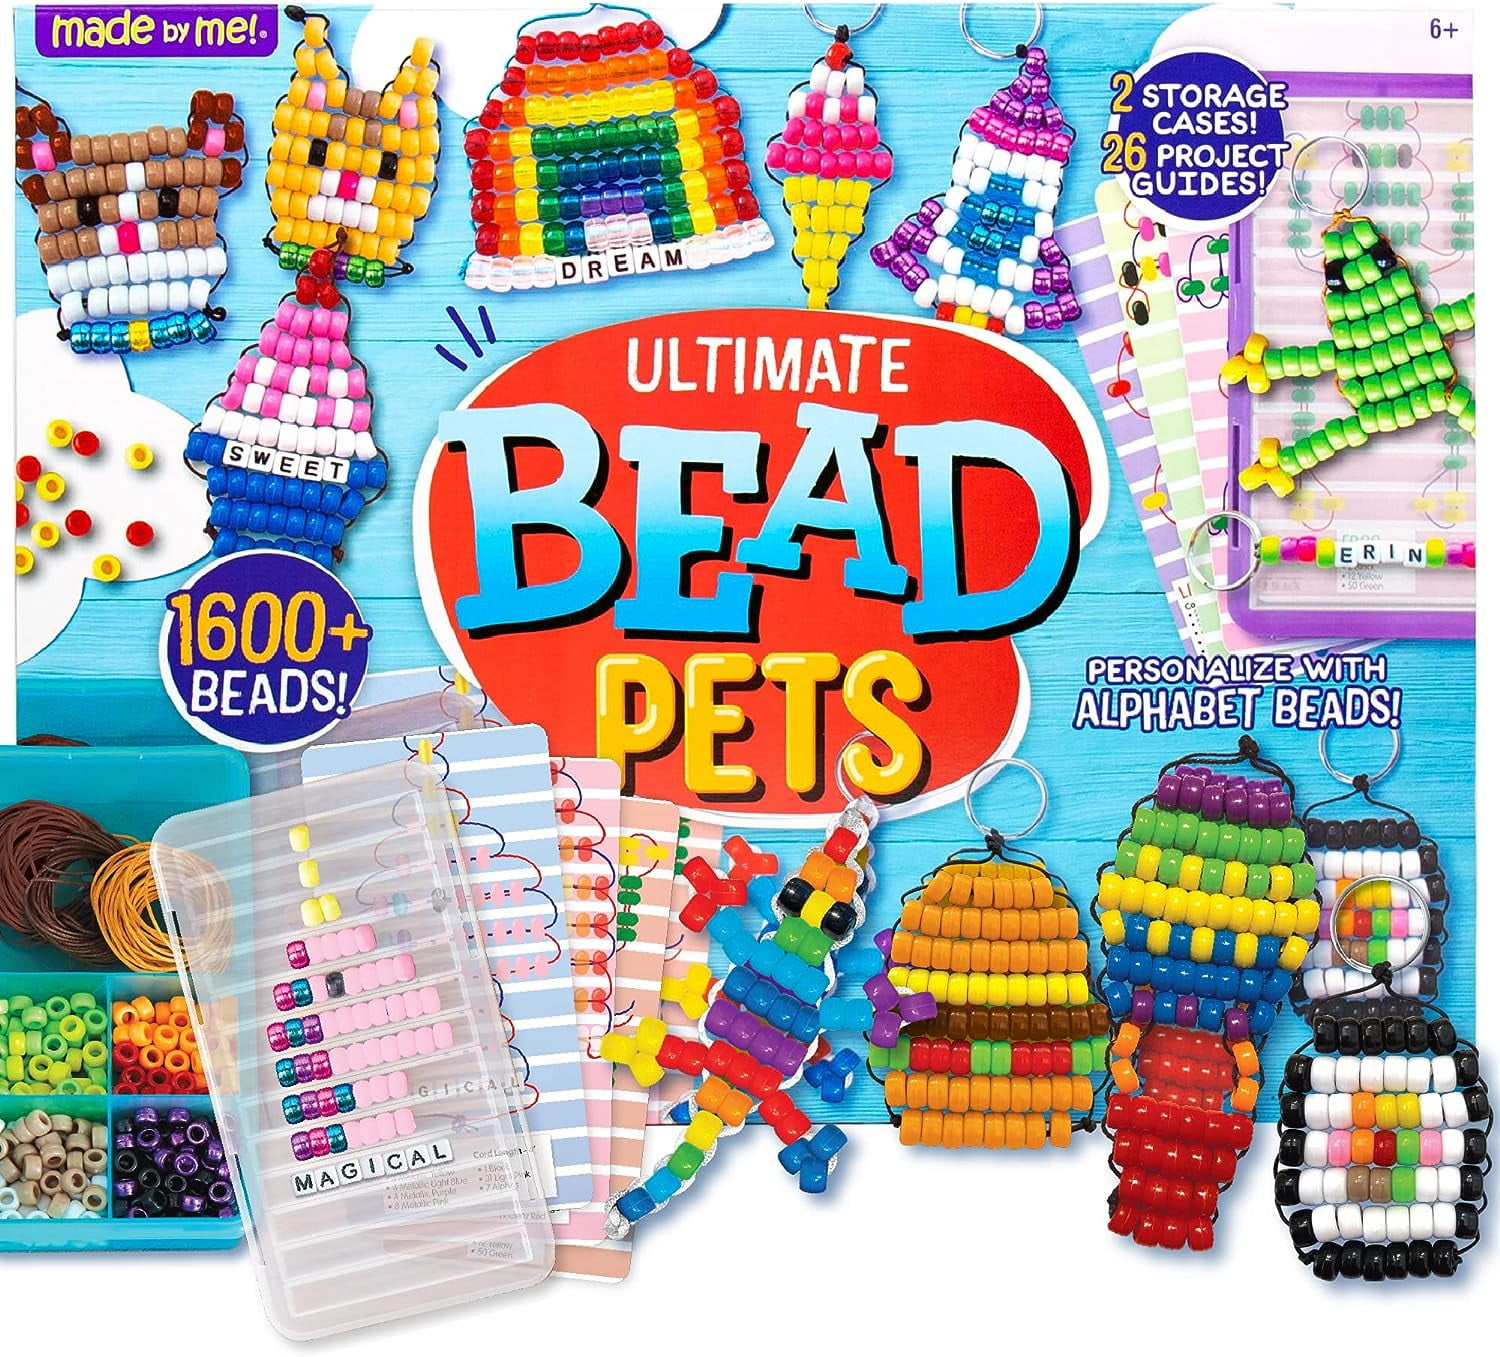 Made By Me Create Your Own Bead Pets, Boys and Girls, Child, Ages 6+ -  Walmart.com